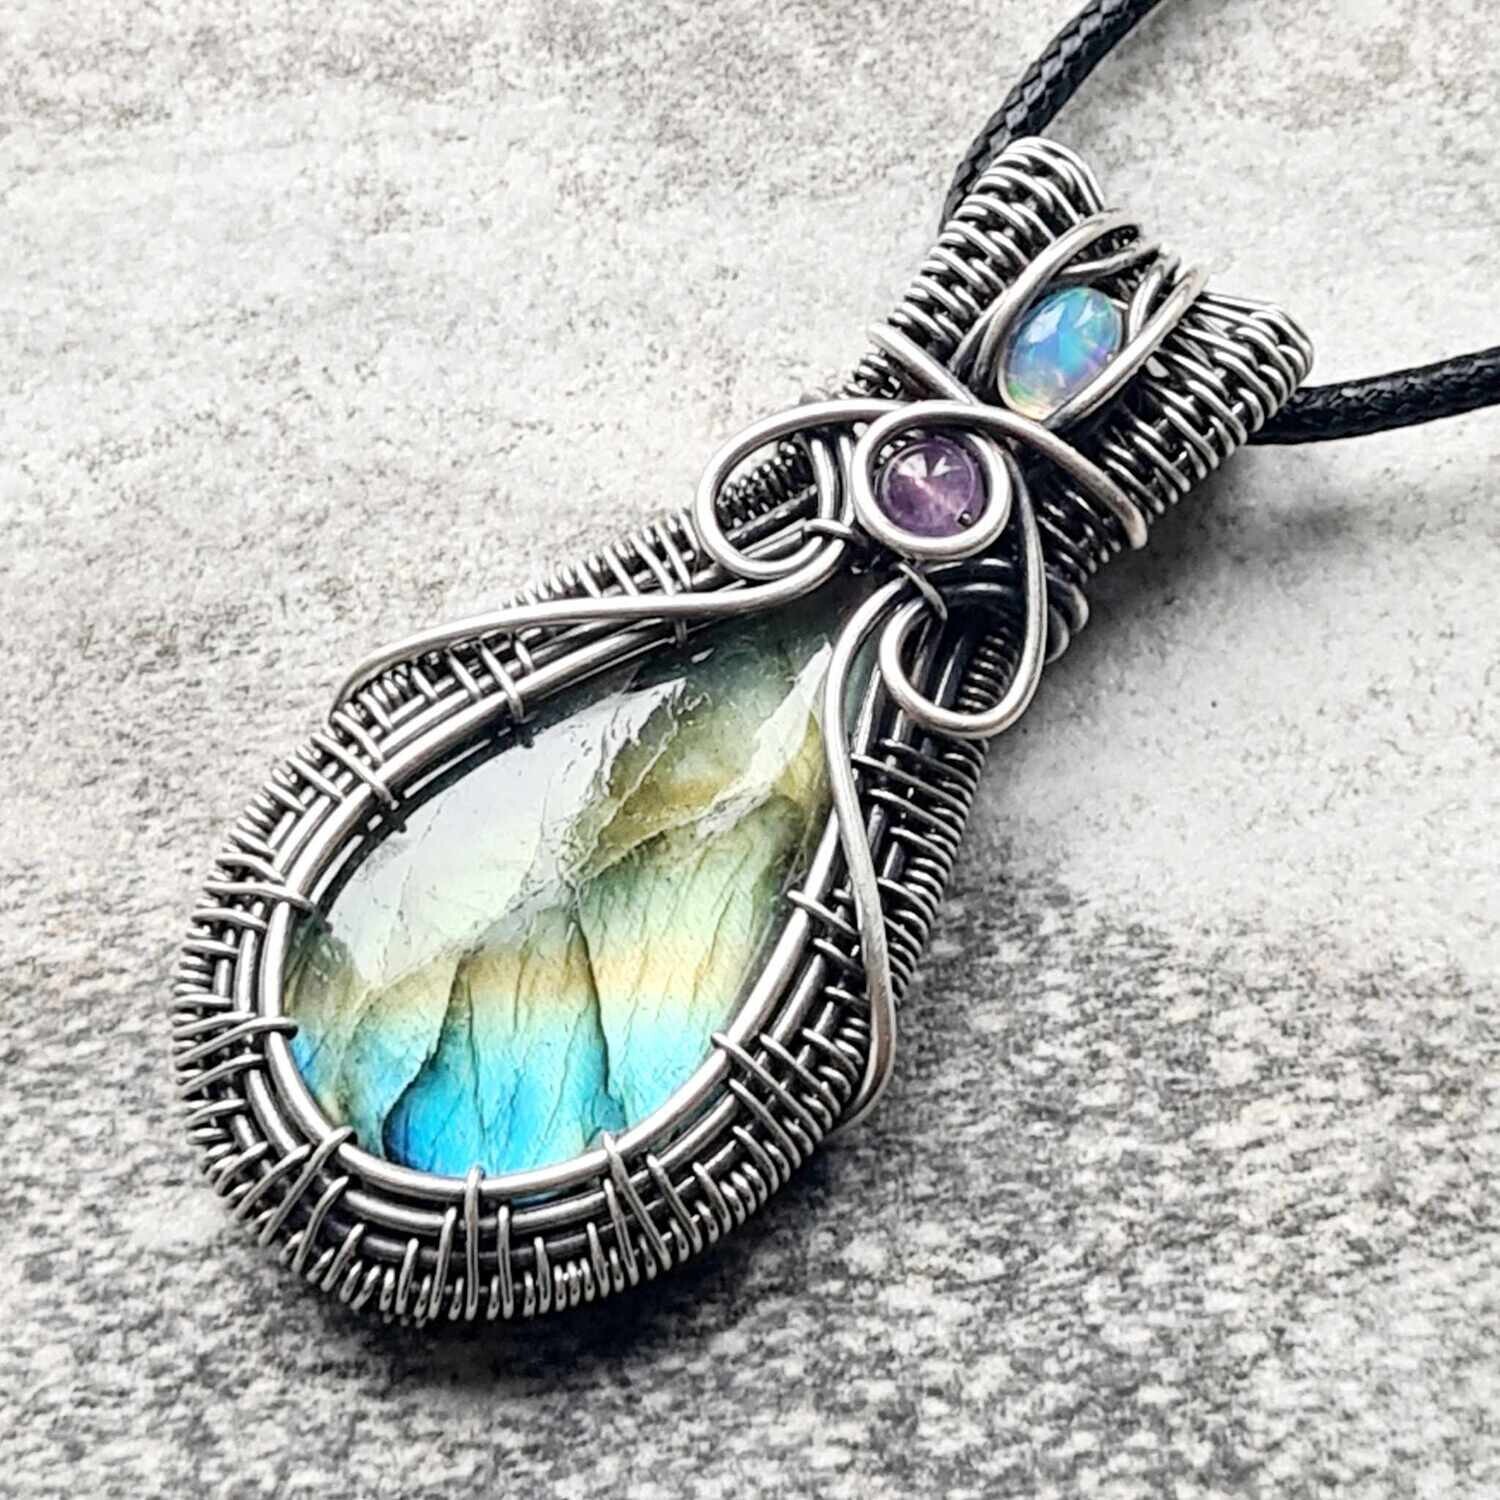 AZURE DRAGON - Labradorite with Amethyst and WELO Opal accents in sterling silver with necklace.